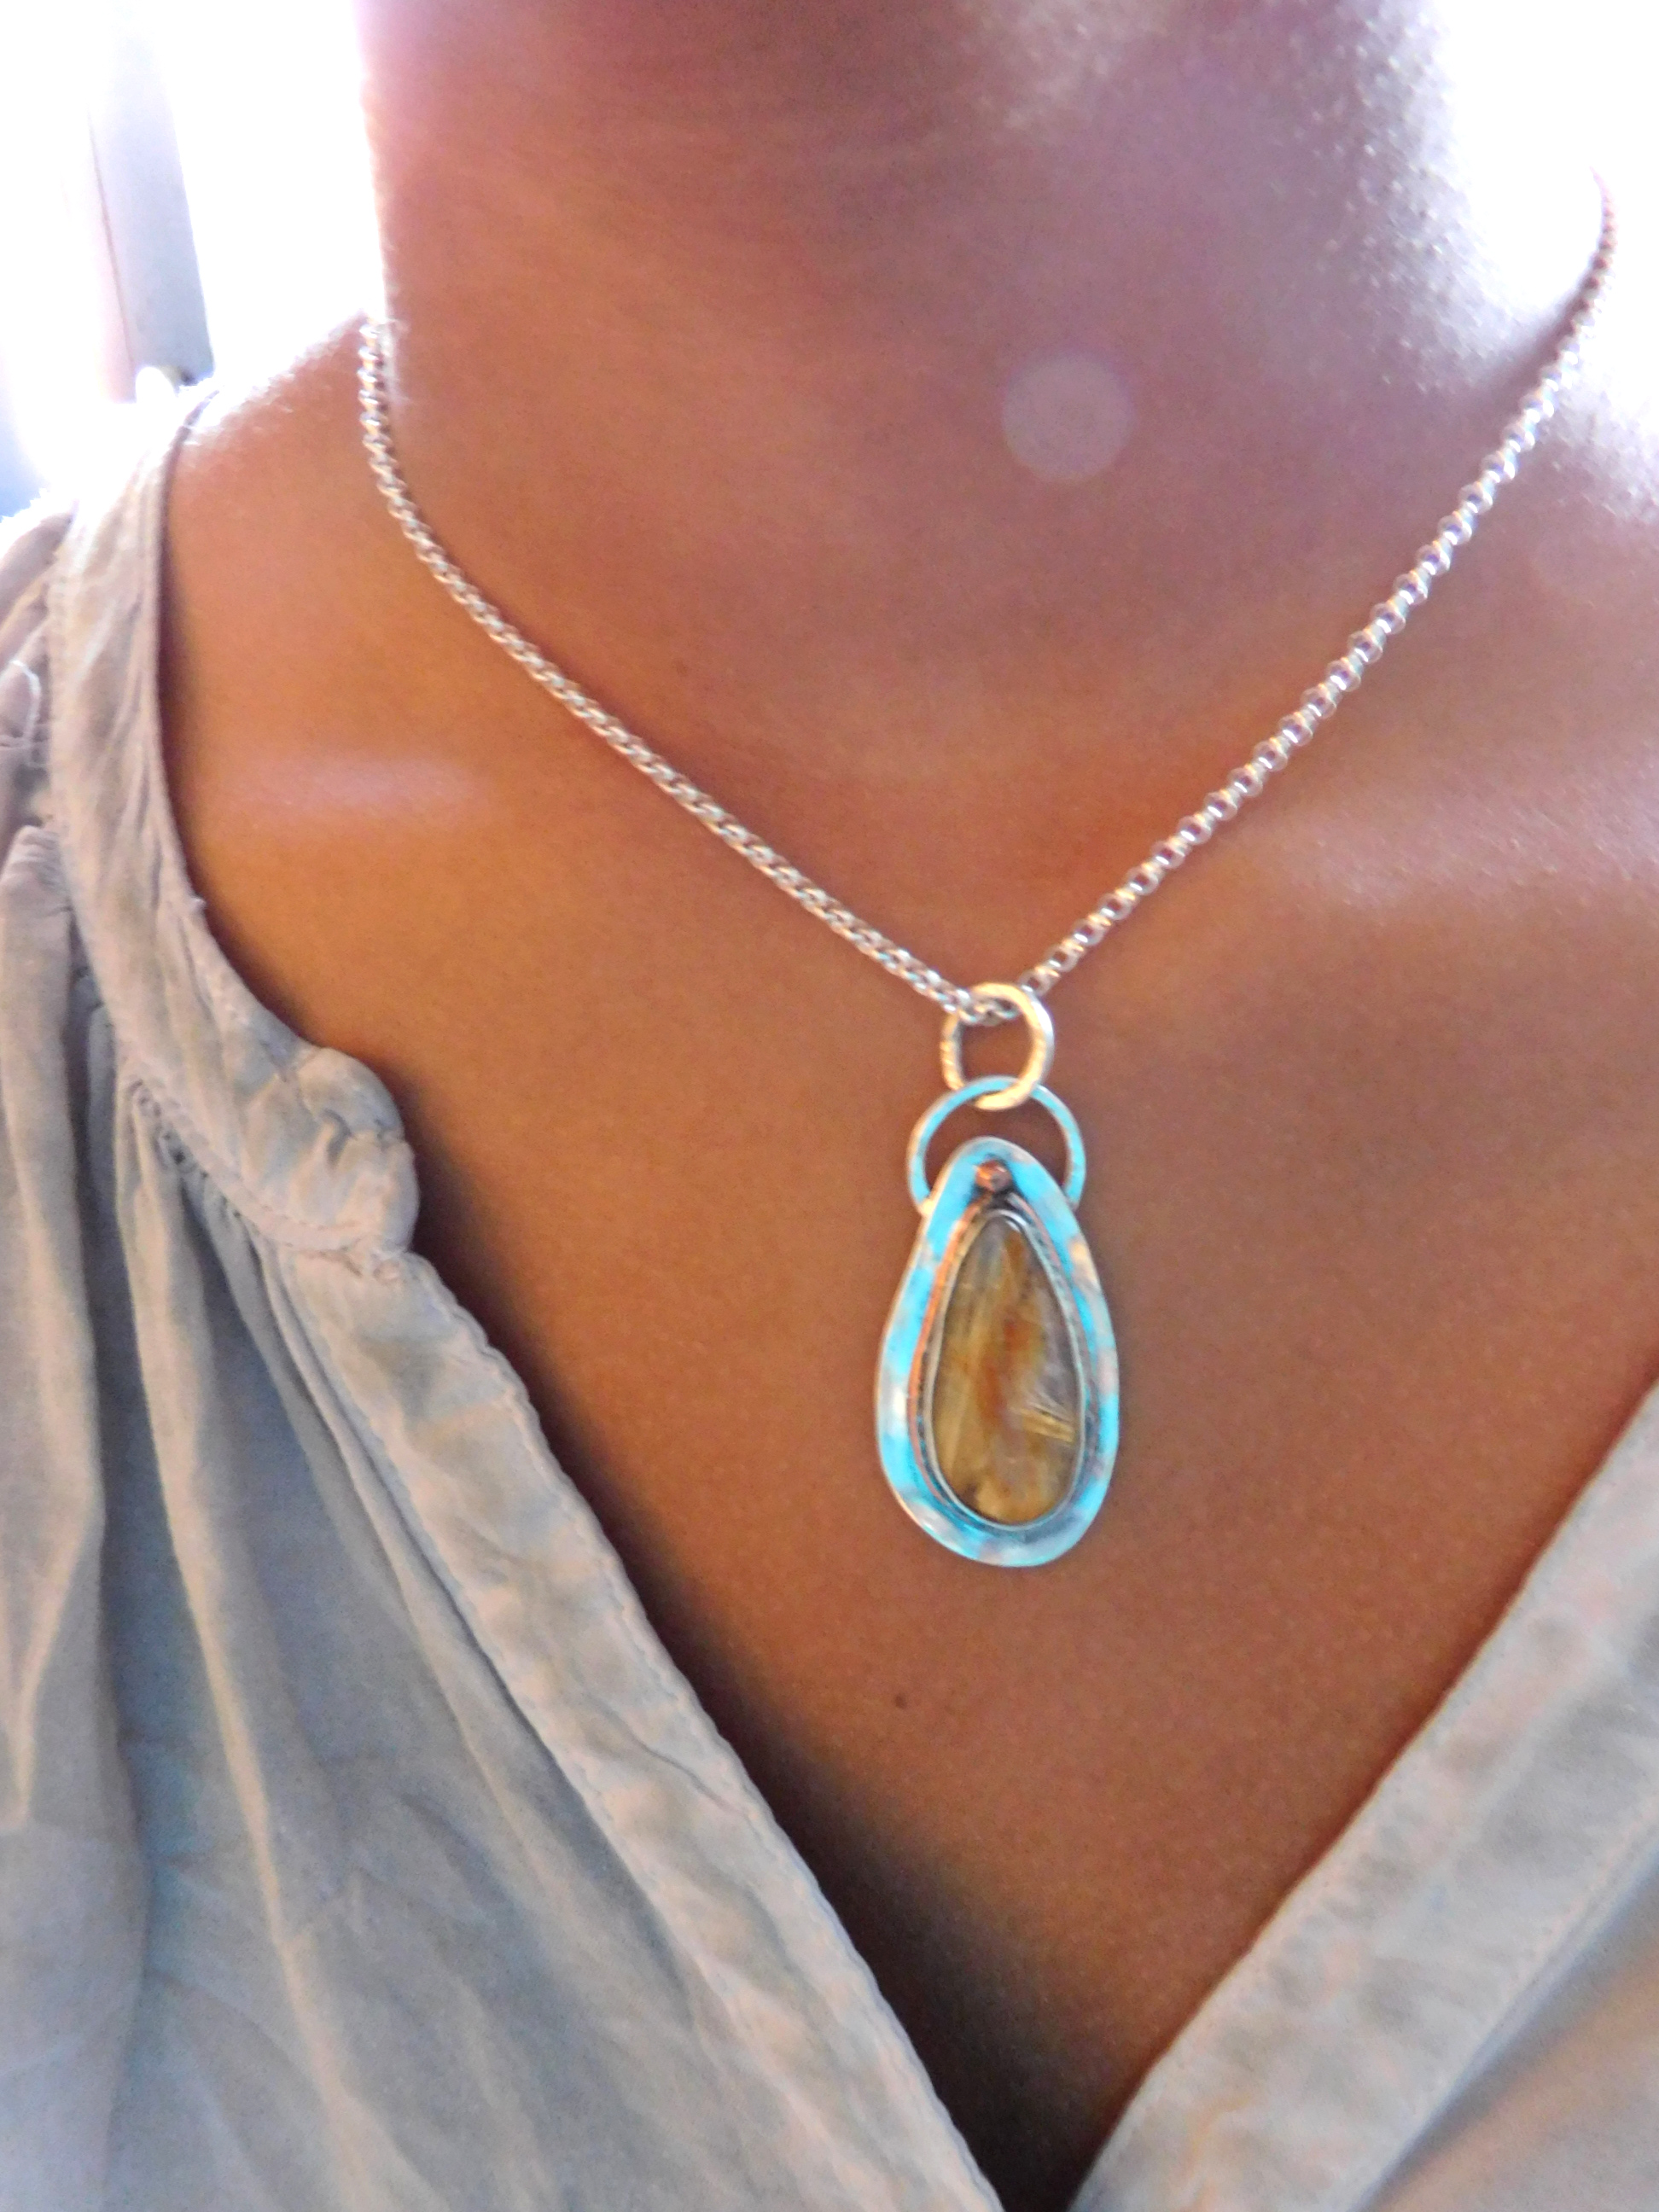 Pendant with rutilated Quartz stone set in sterling silver and copper